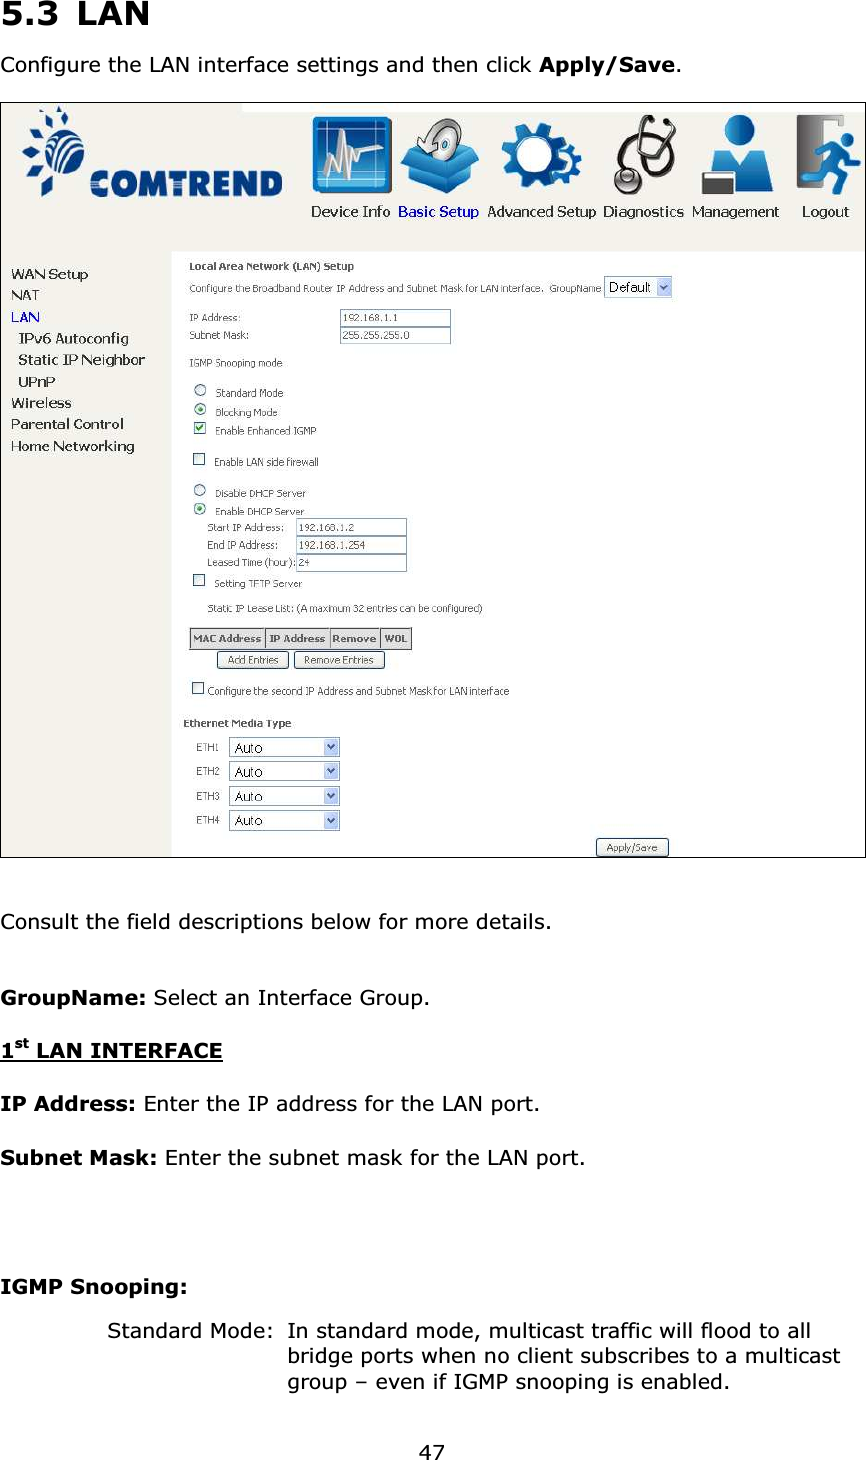  47 5.3 LAN Configure the LAN interface settings and then click Apply/Save.    Consult the field descriptions below for more details.  GroupName: Select an Interface Group. 1st LAN INTERFACE IP Address: Enter the IP address for the LAN port. Subnet Mask: Enter the subnet mask for the LAN port.    IGMP Snooping:       Standard Mode:  In standard mode, multicast traffic will flood to all       bridge ports when no client subscribes to a multicast       group – even if IGMP snooping is enabled. 